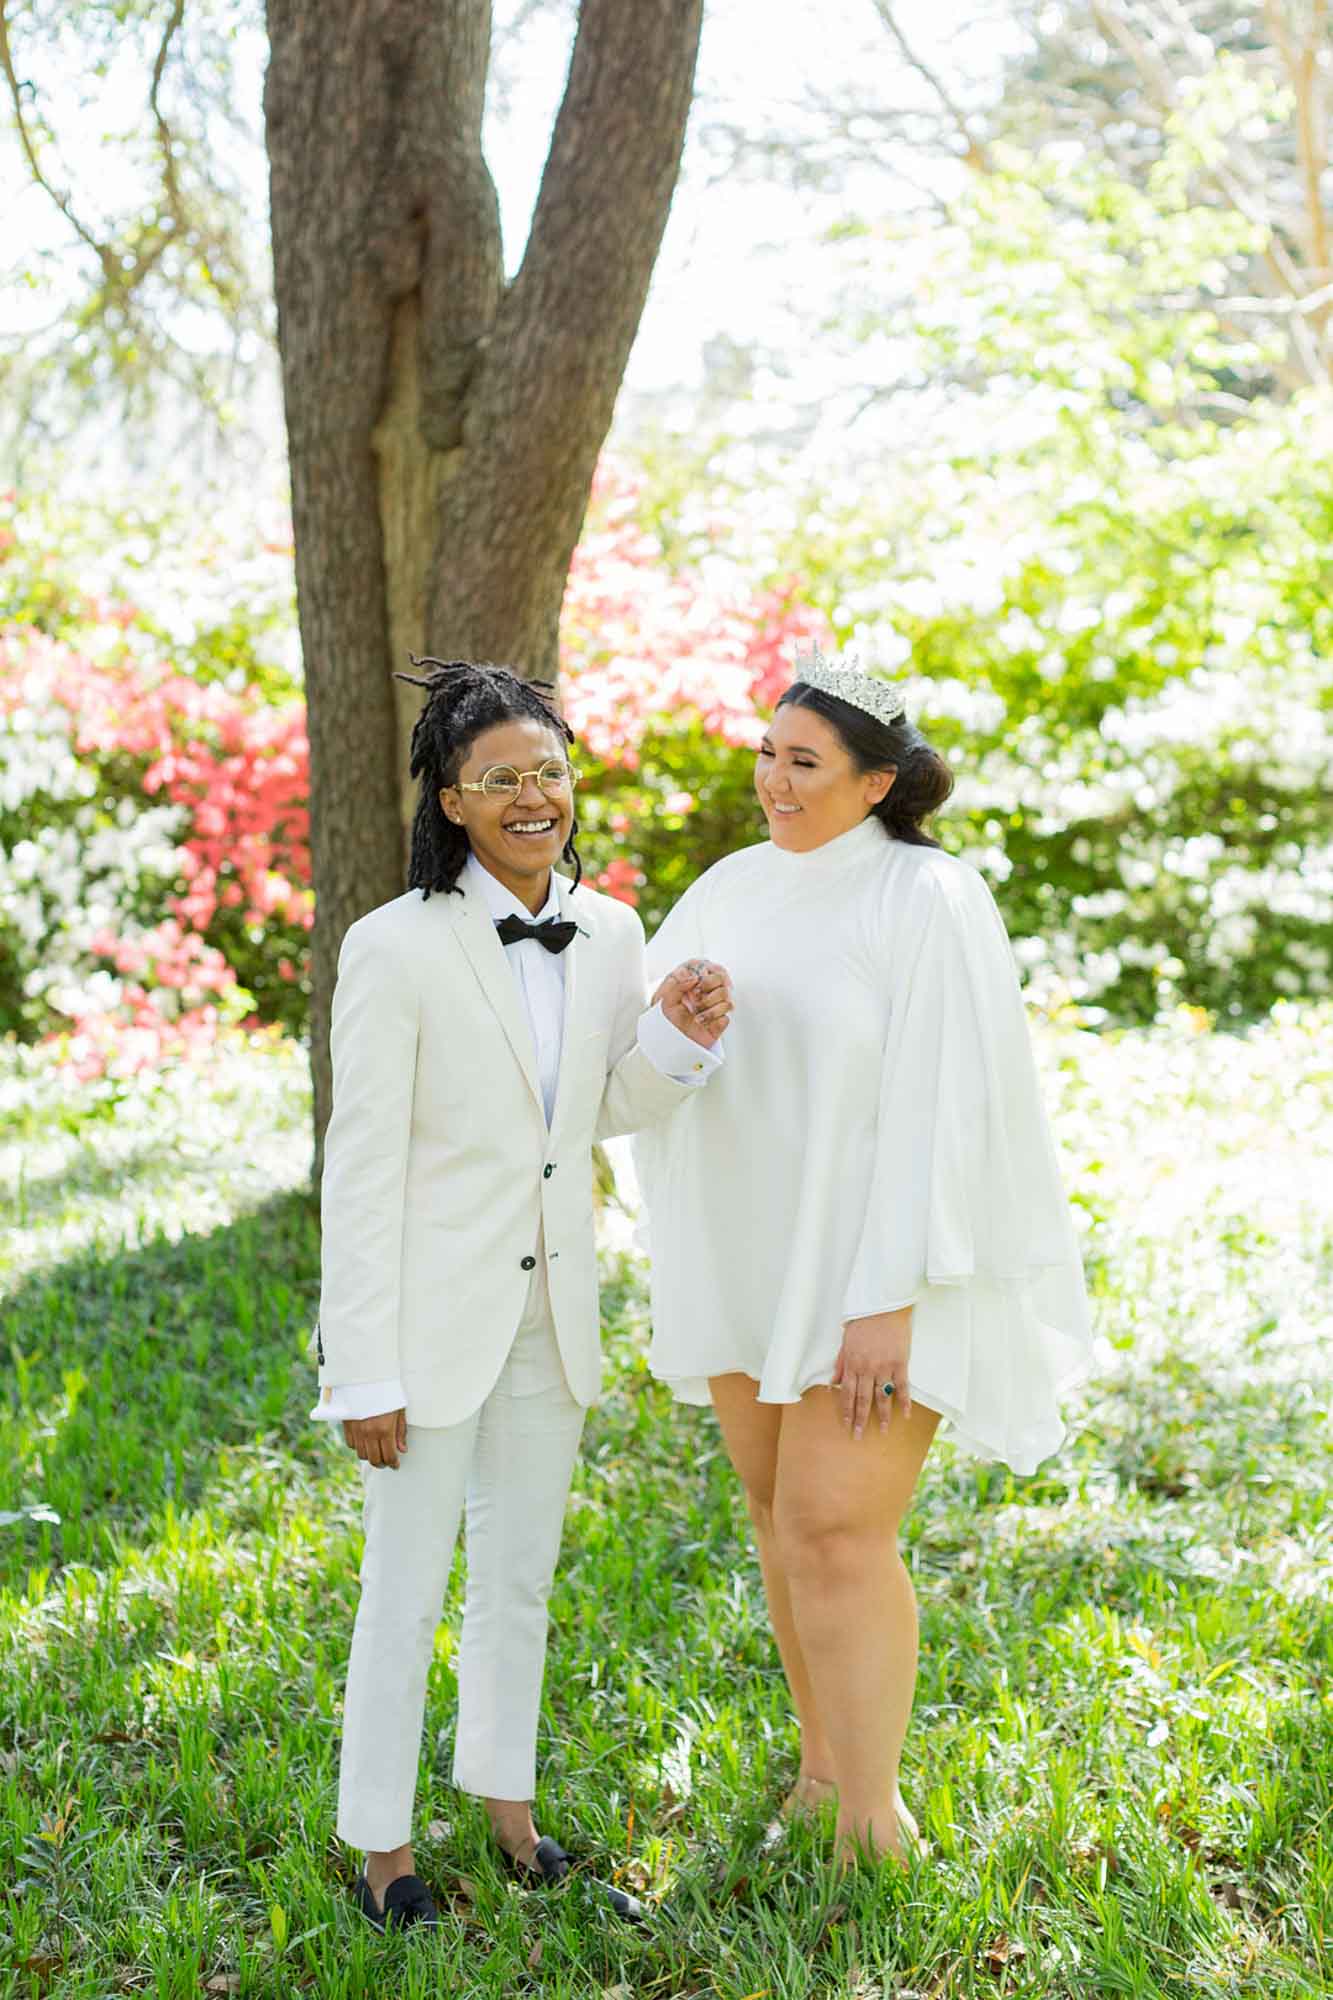 Sunny South Carolina elopement surrounded by greenery | Jessica Hunt Photography | Featured on Equally Wed, the leading LGBTQ+ wedding magazine - white tux, cut out dress, tiara, crown, gold rimmed glasses